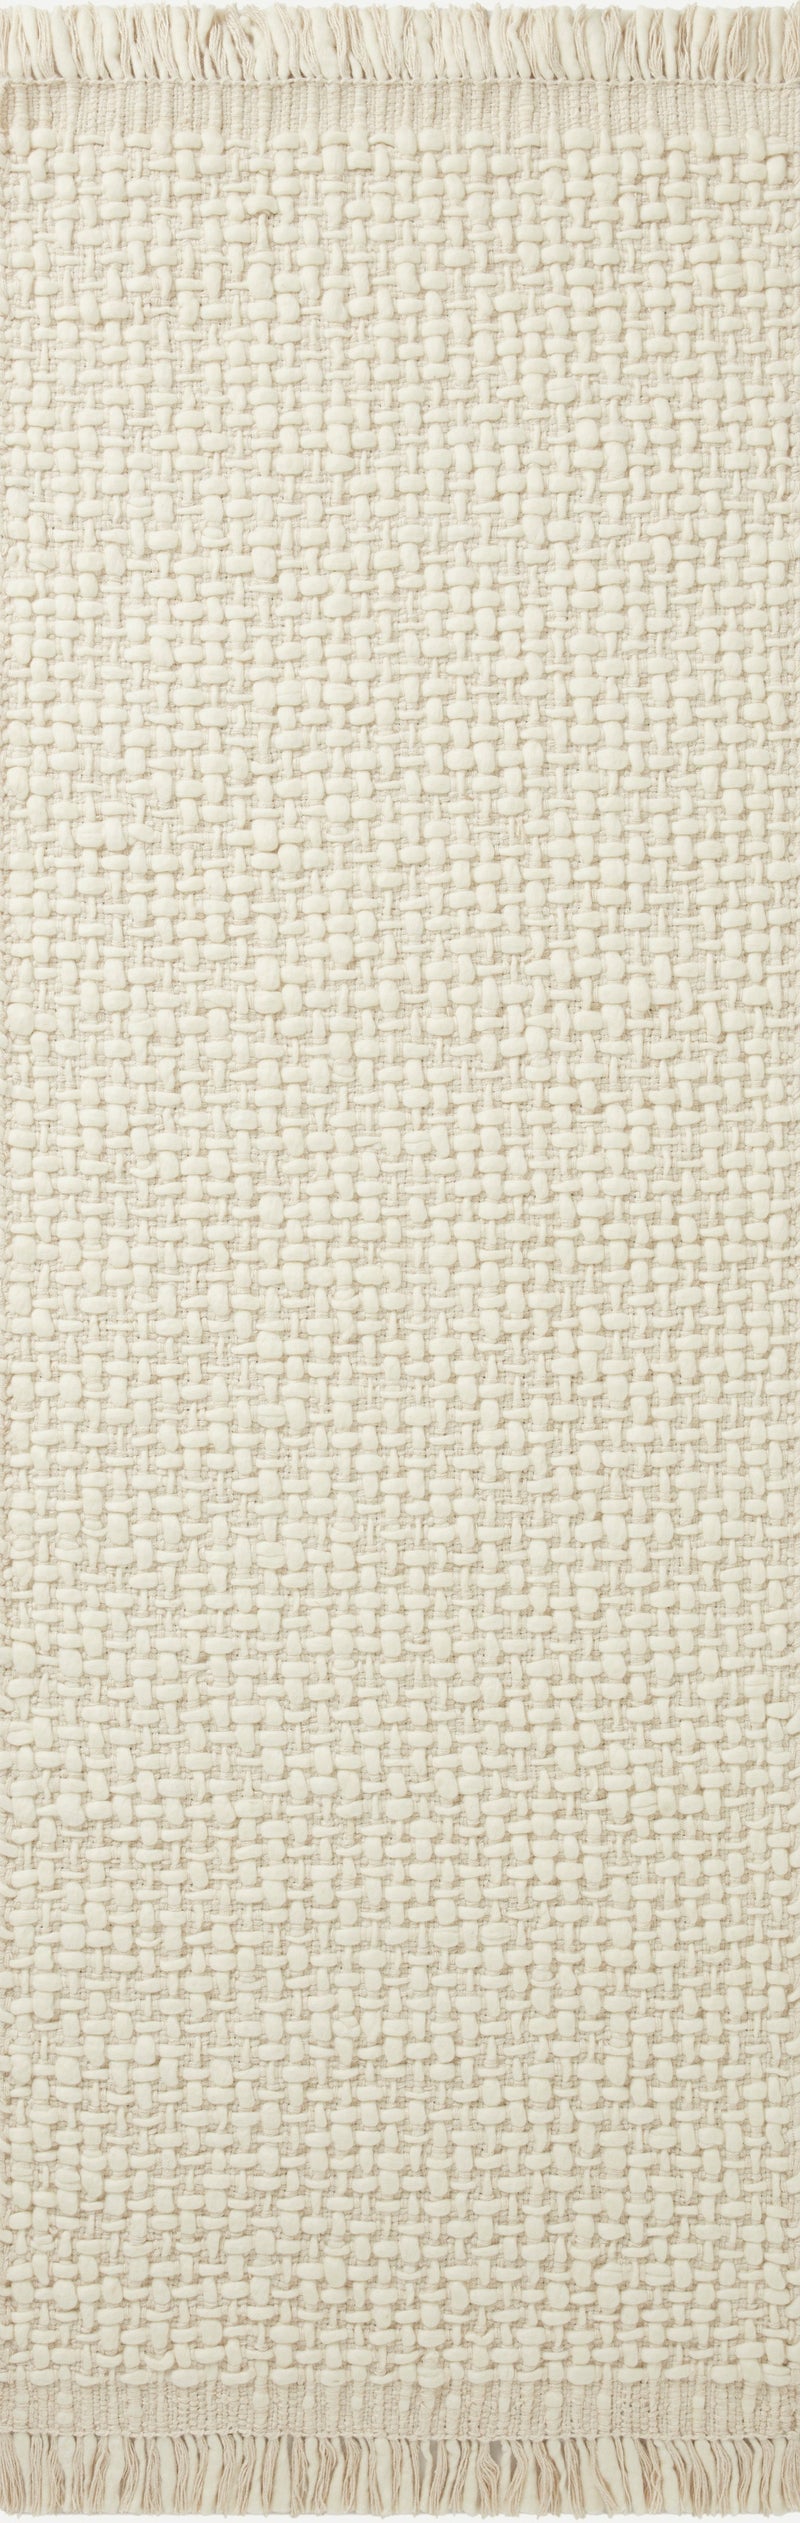 media image for yellowstone hand woven ivory ivory rug by amber lewis x loloi yeloyel 01ivivb6f0 2 272